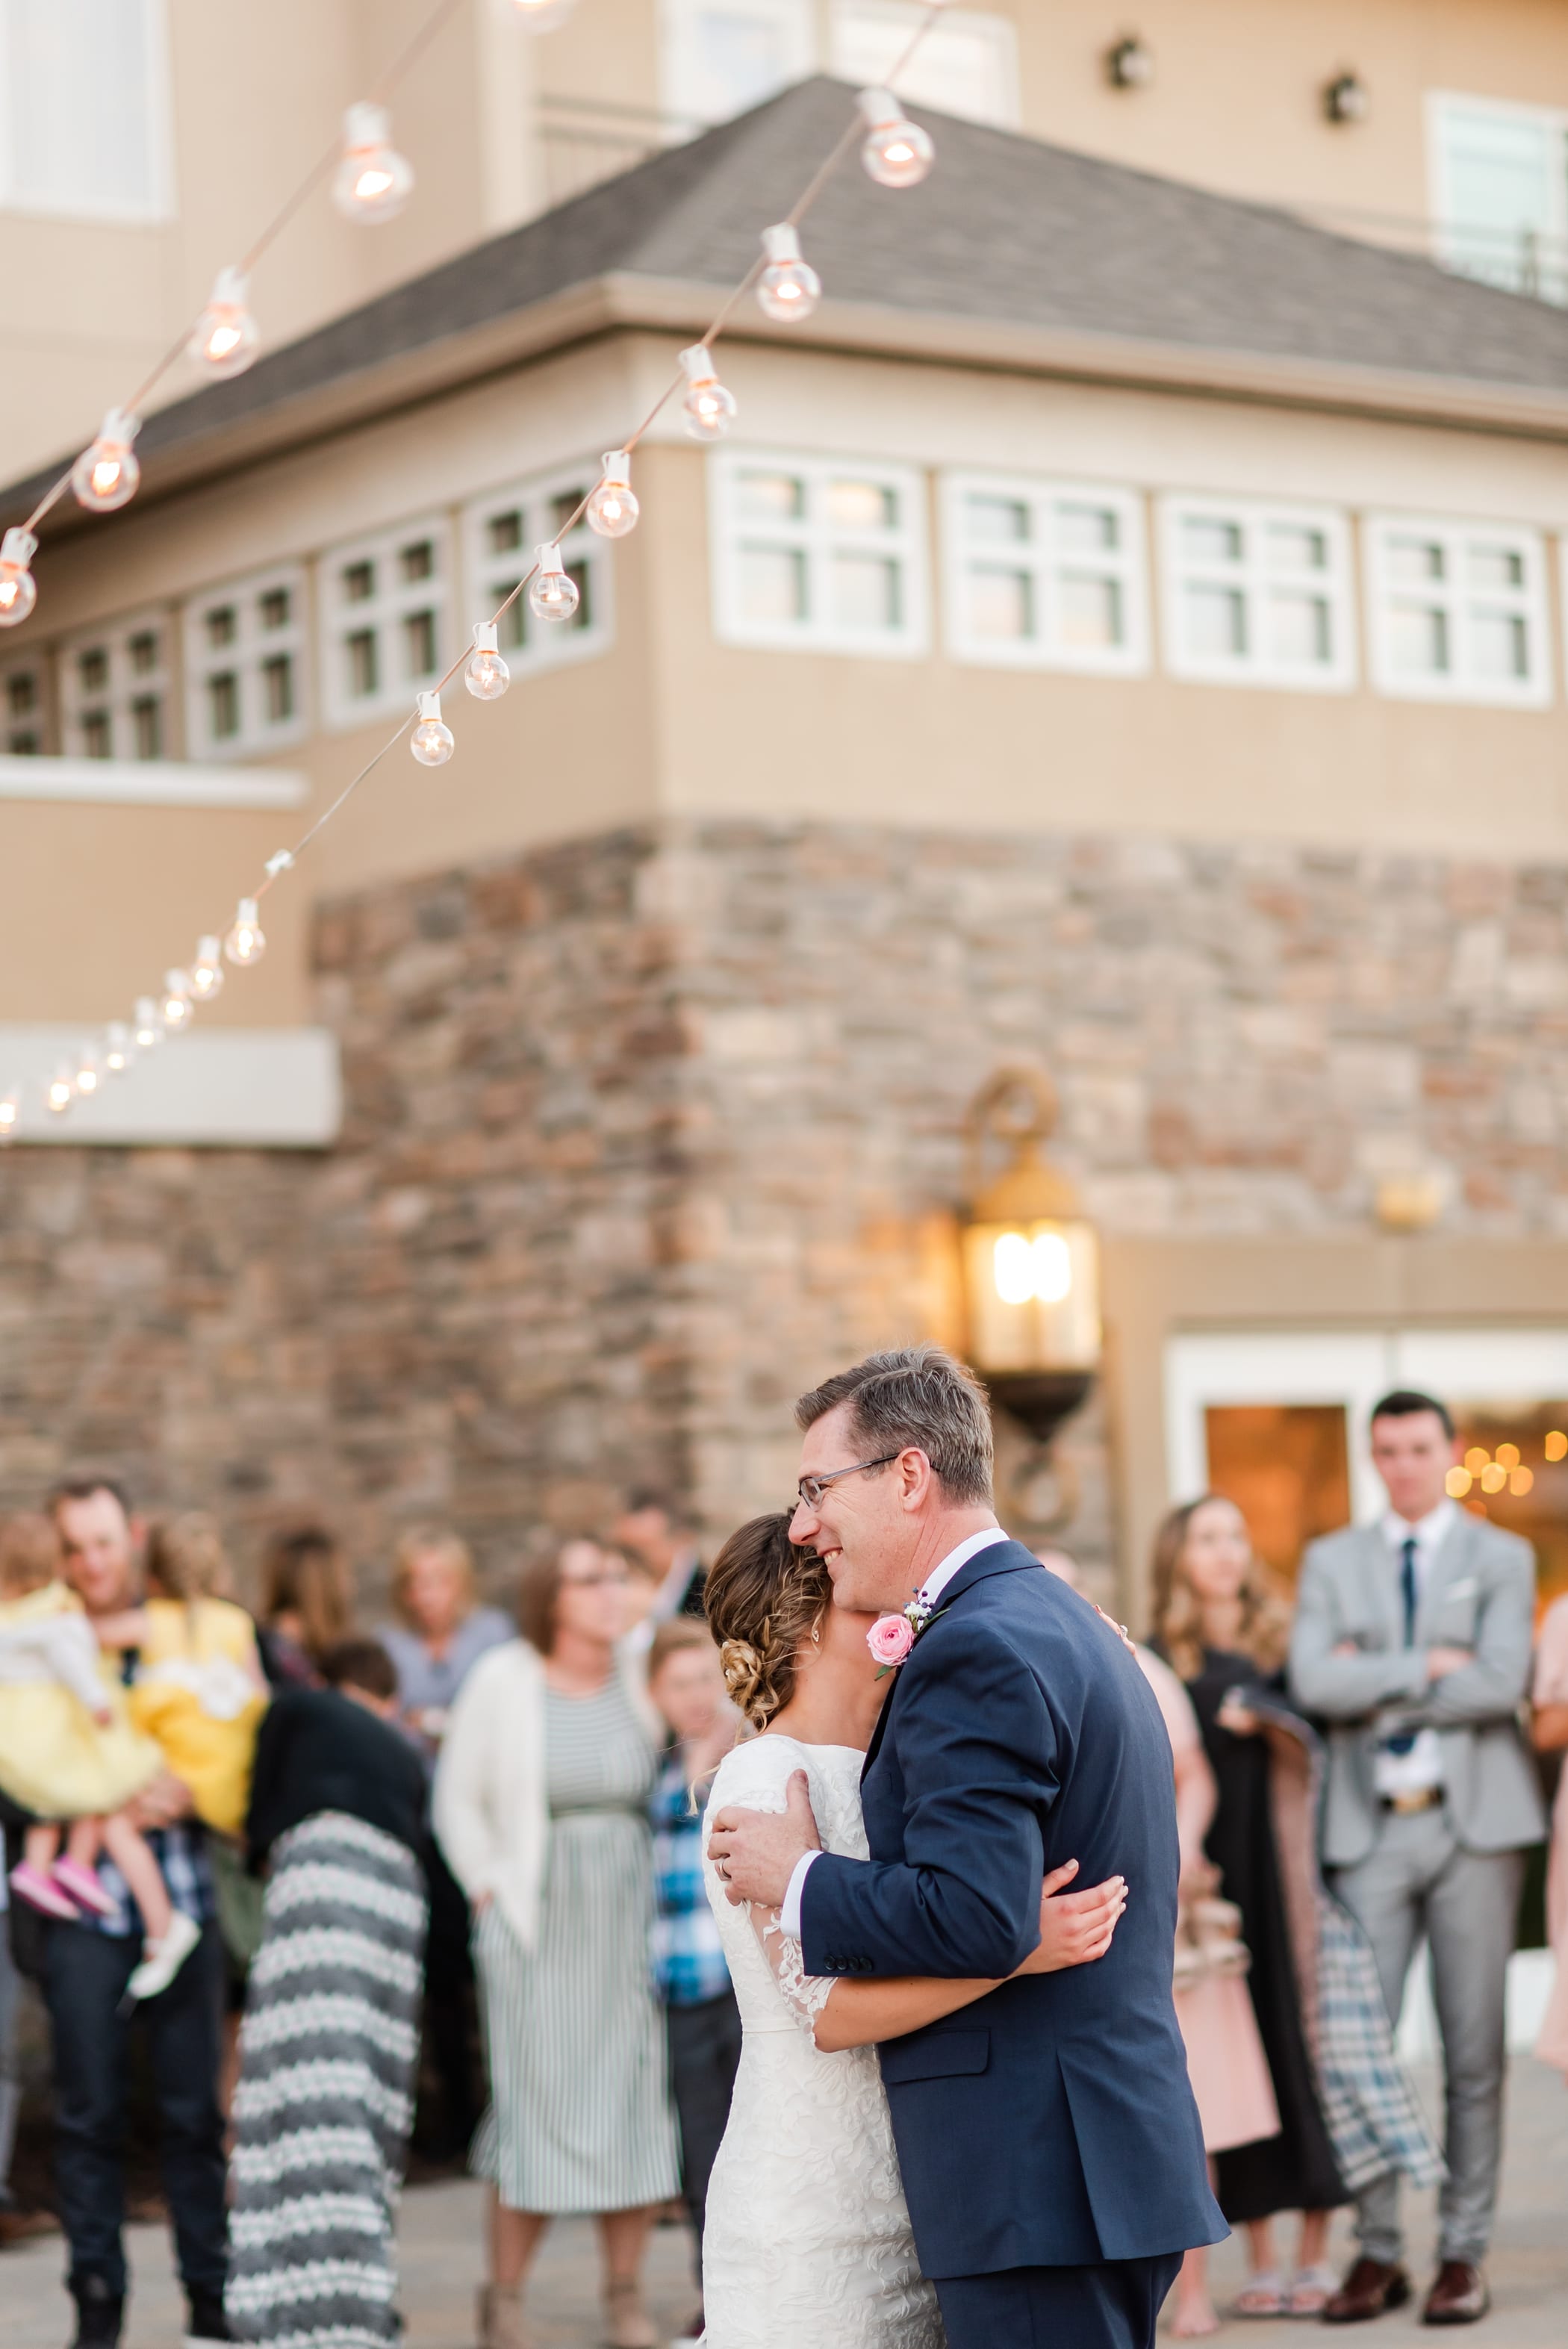 Tender moments during a father daughter dance 